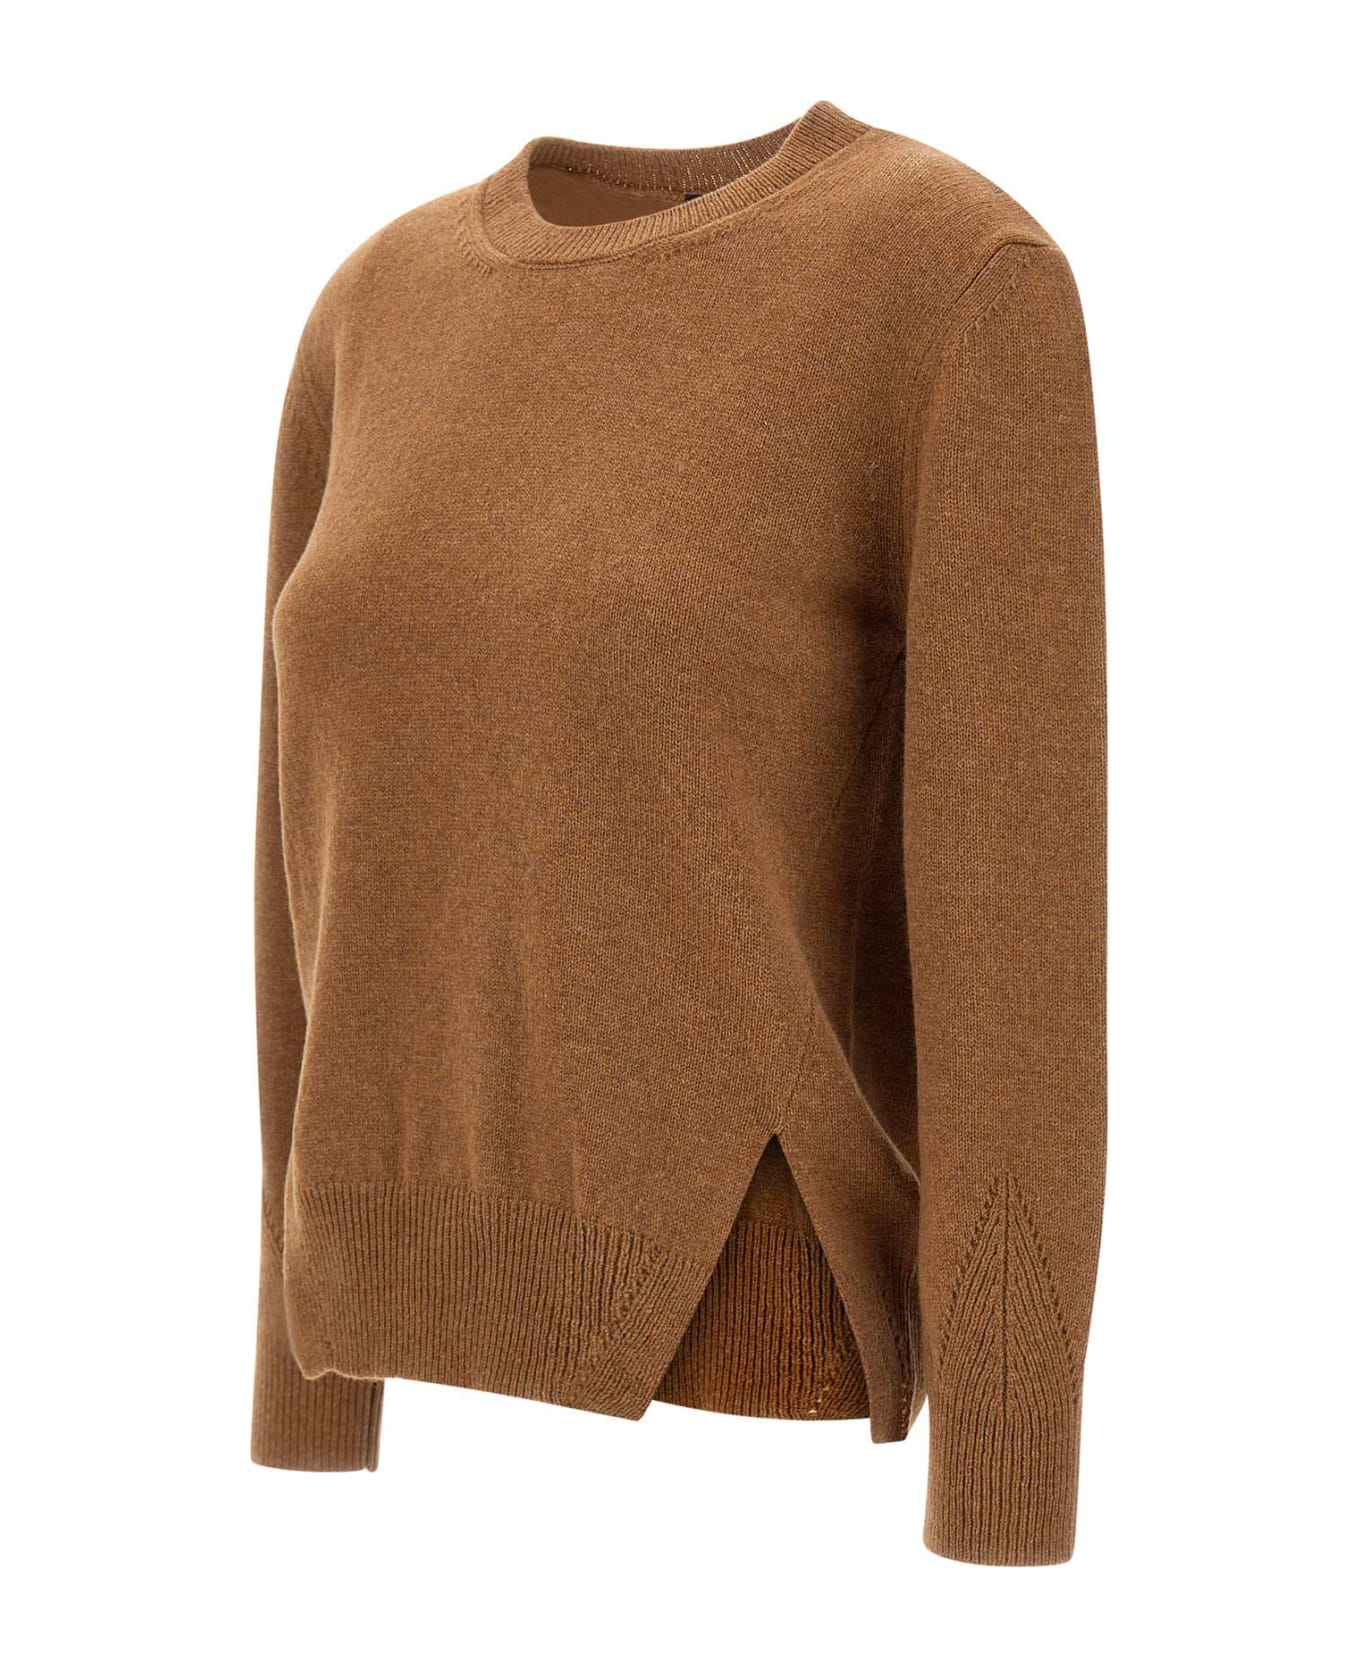 A.P.C. Merino Wool Pullover - BROWN